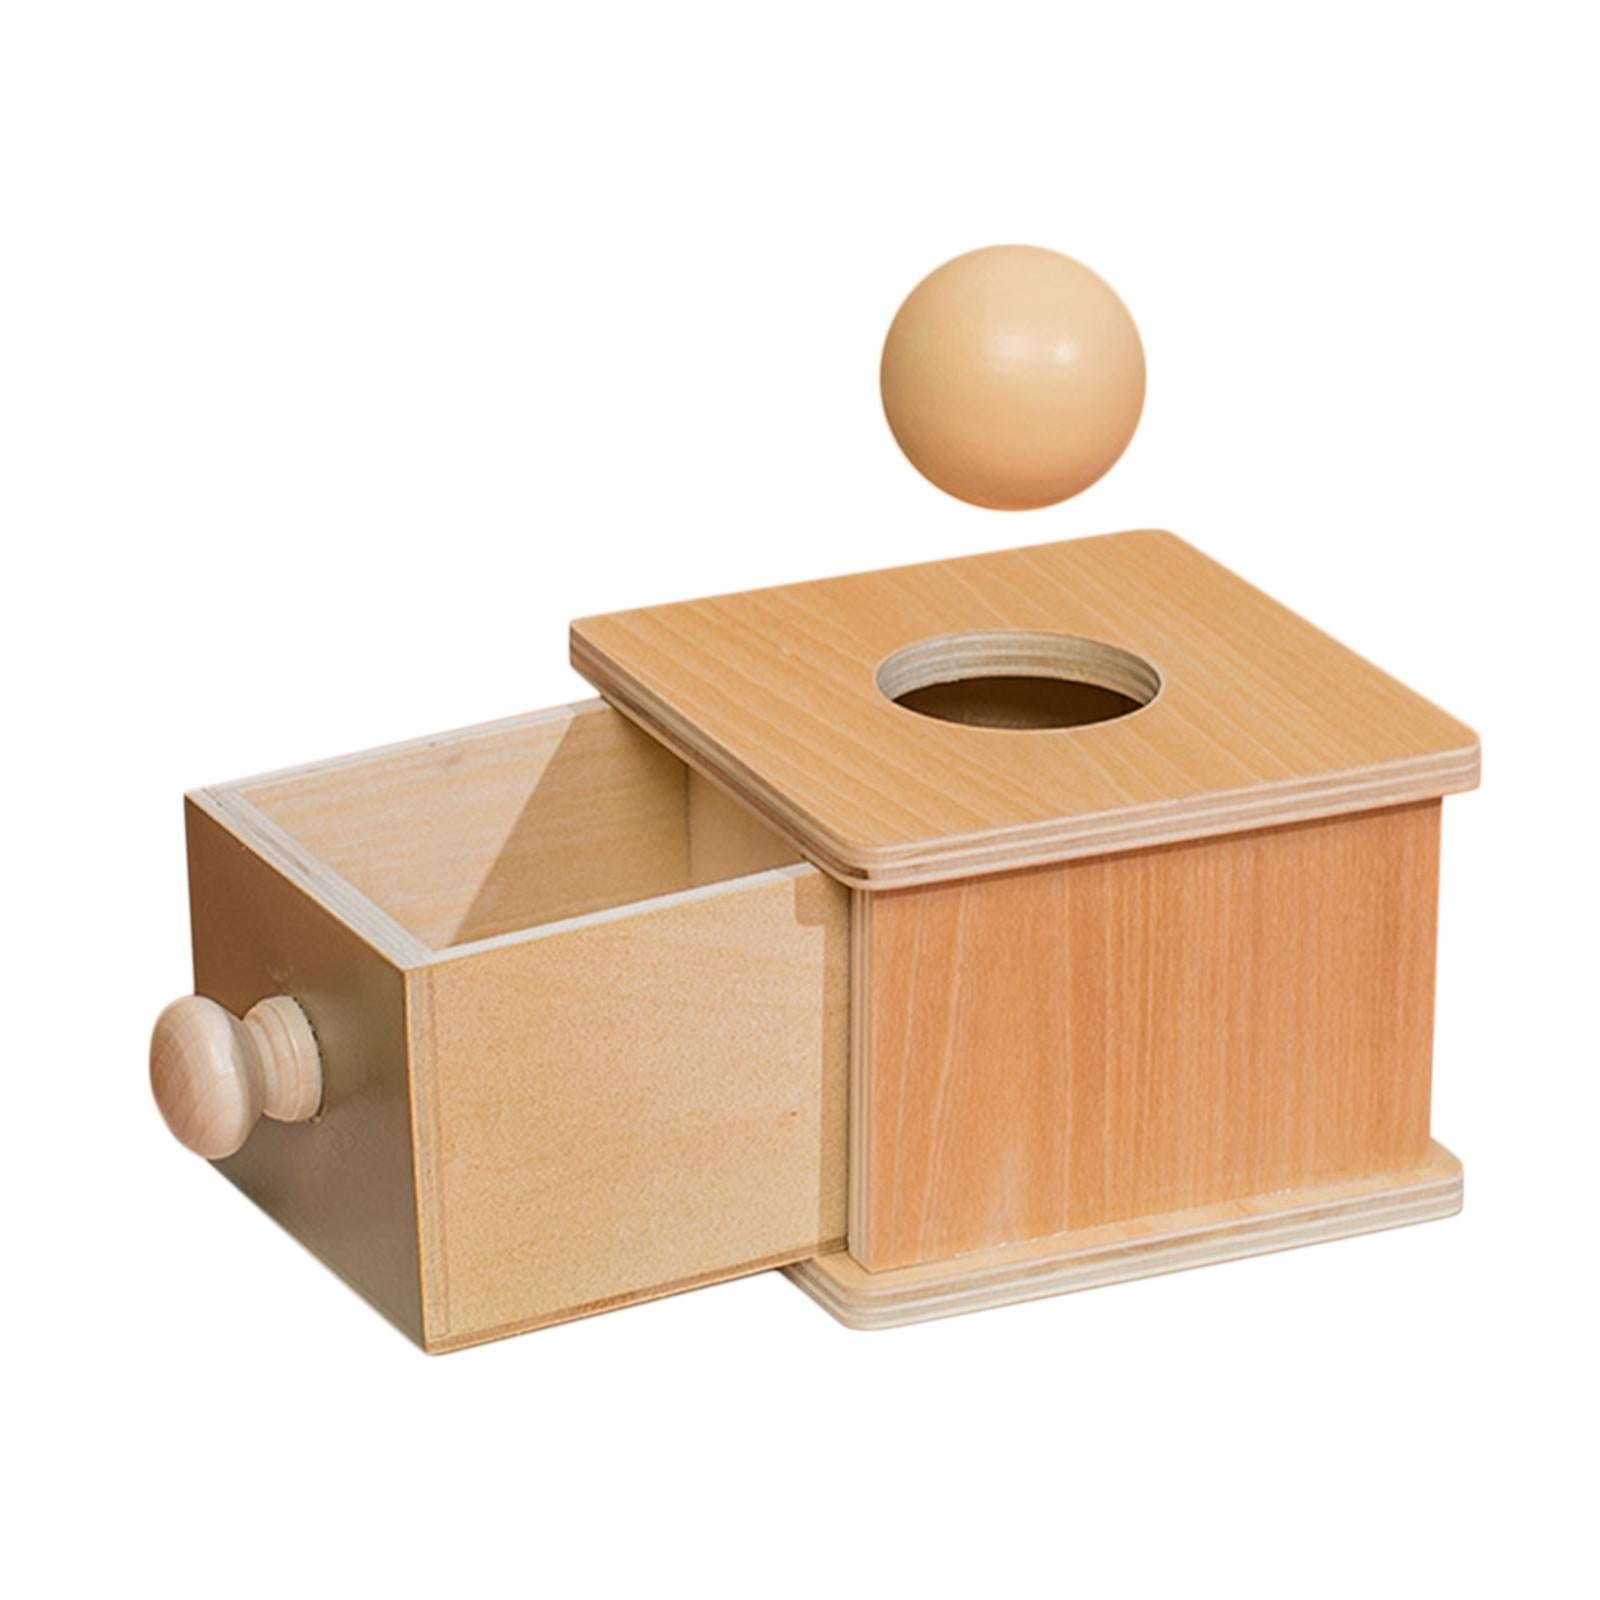 Wooden object permanence box, drawer open with ball hovering above